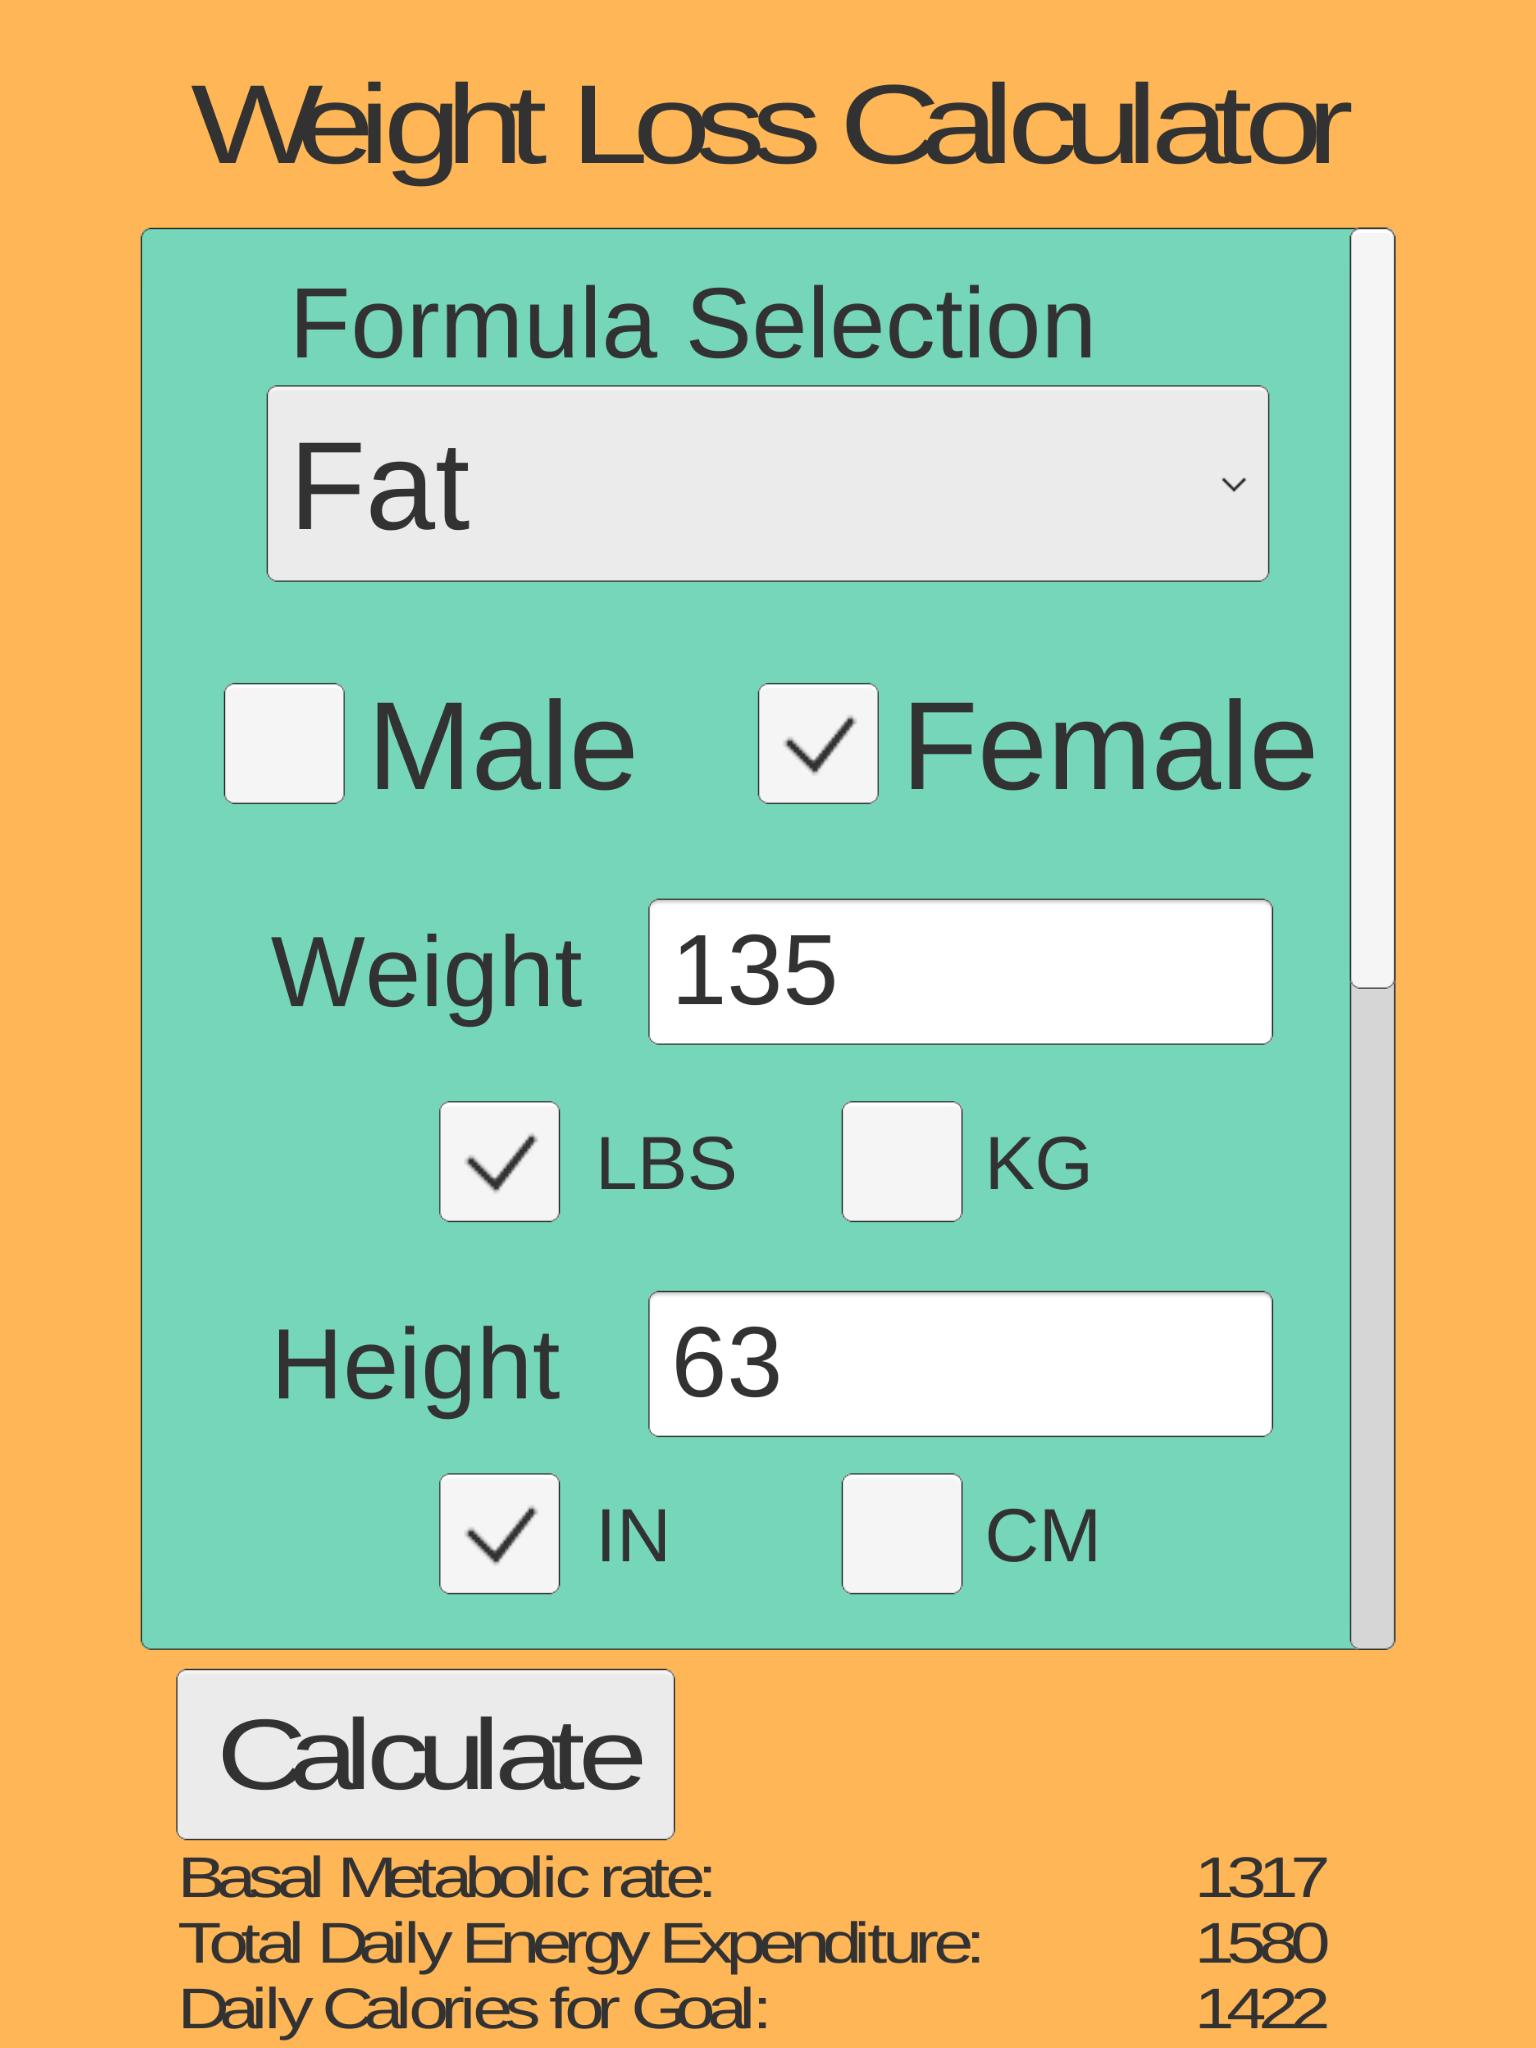 How To Calculate Percentage Of Body Fat Loss